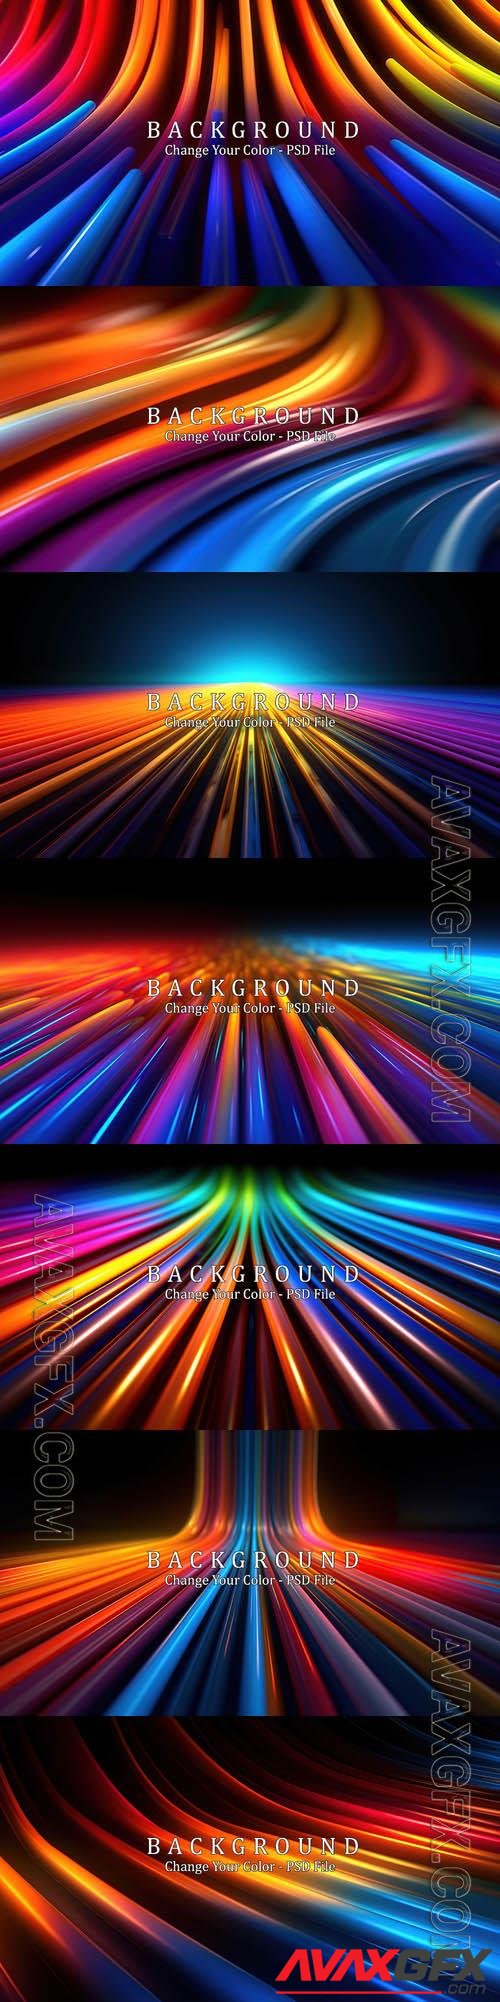 PSD abstract scene background product presentation